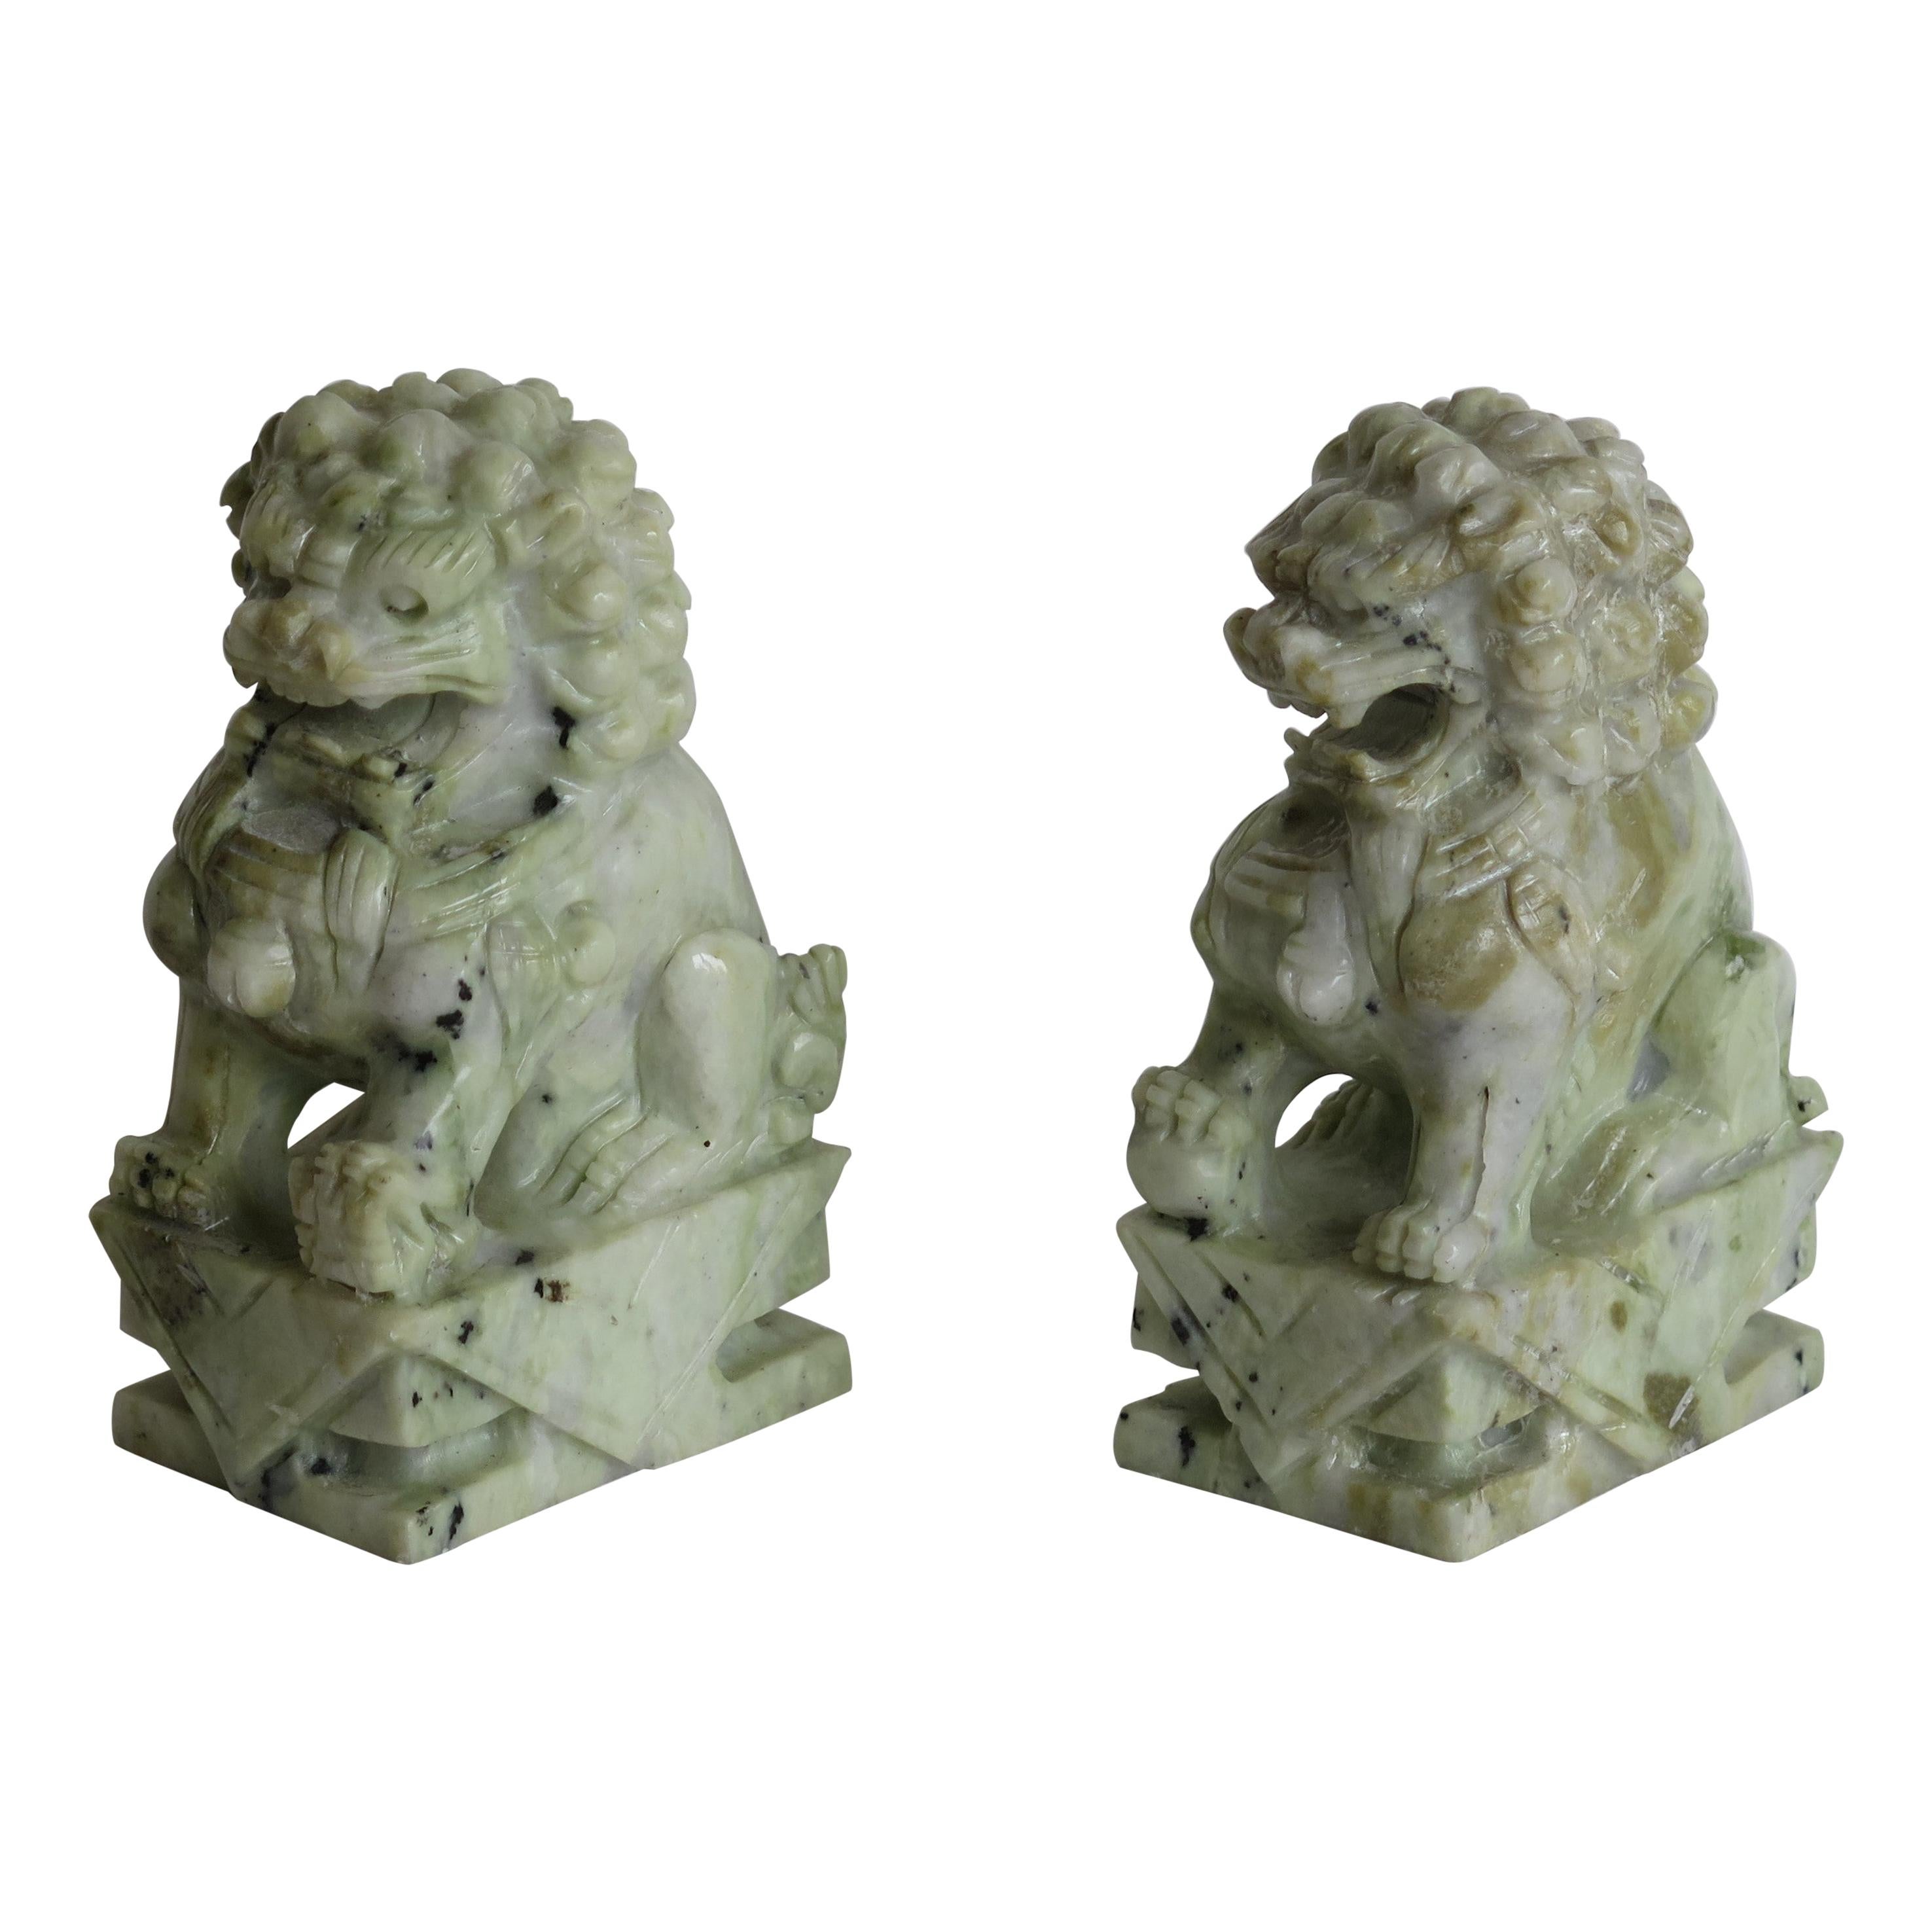 Pair of Chinese Foo Dogs Hand Carved Hardstone Good Colour and Detail, Ca 1940